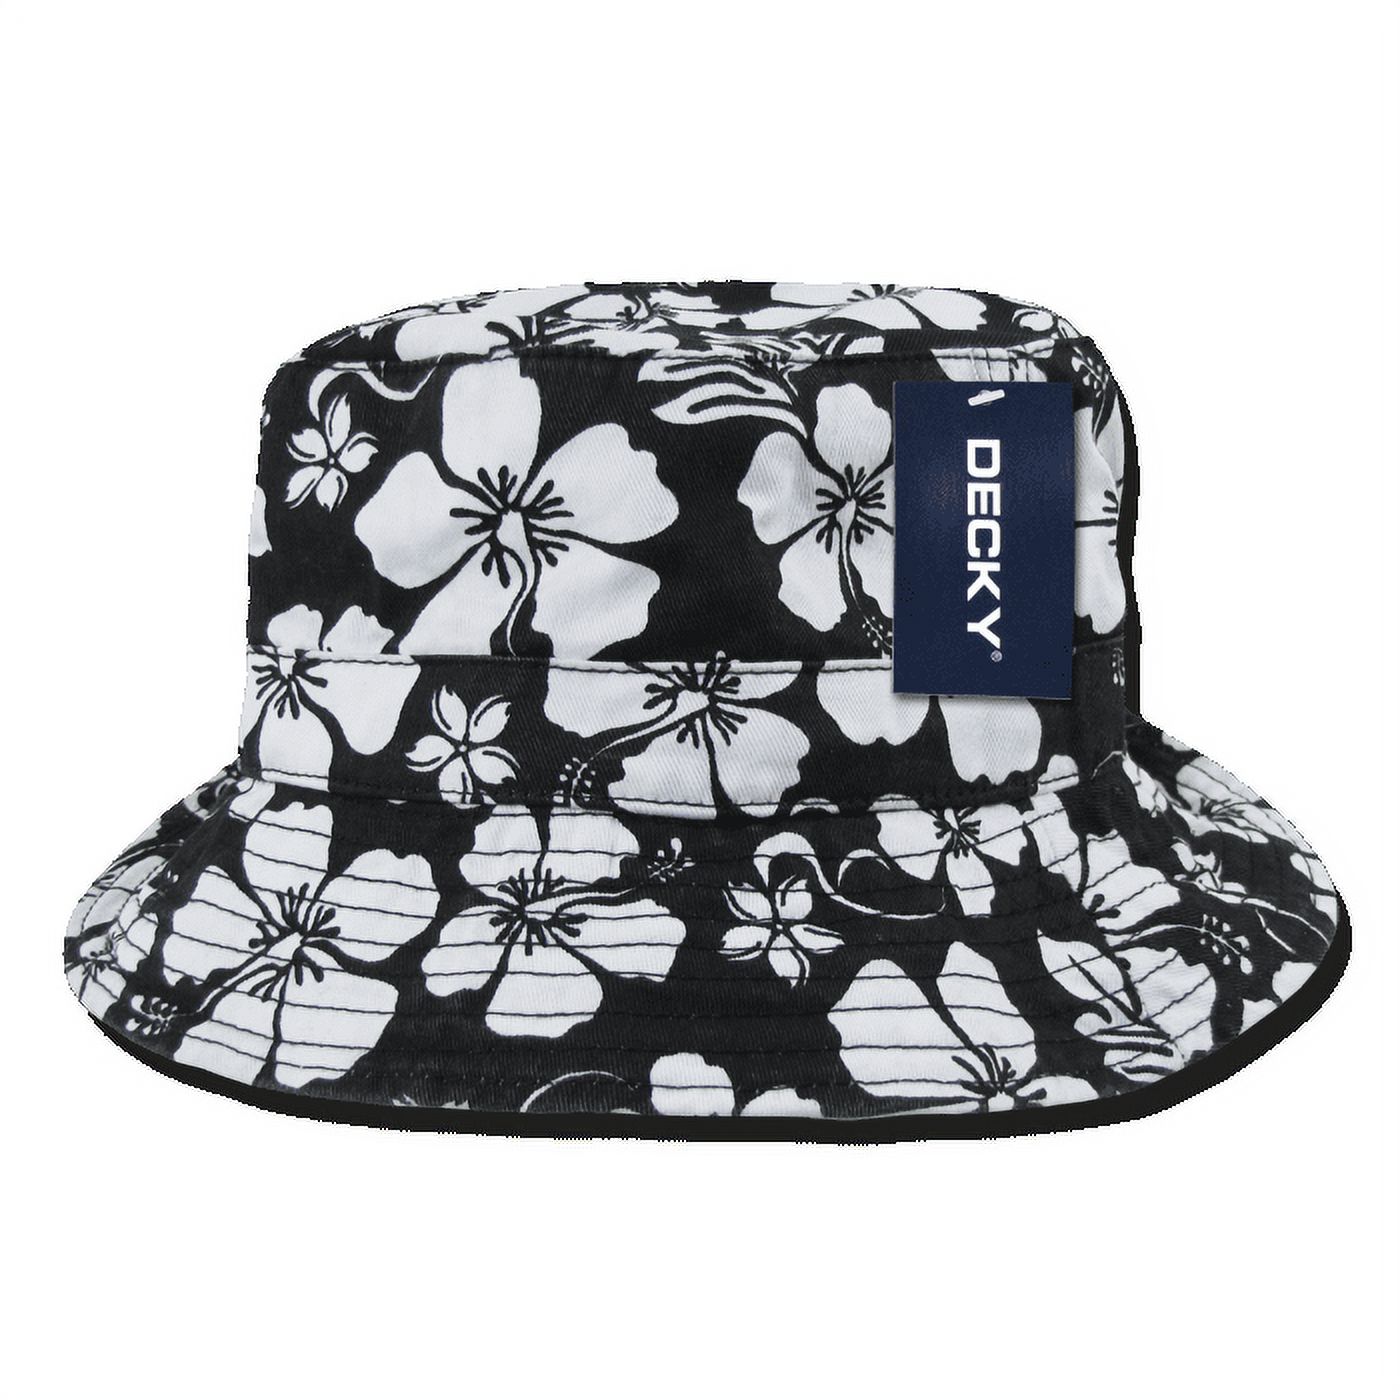 Decky Floral Polo Bucket Hats Caps For Men Women Black - image 1 of 2